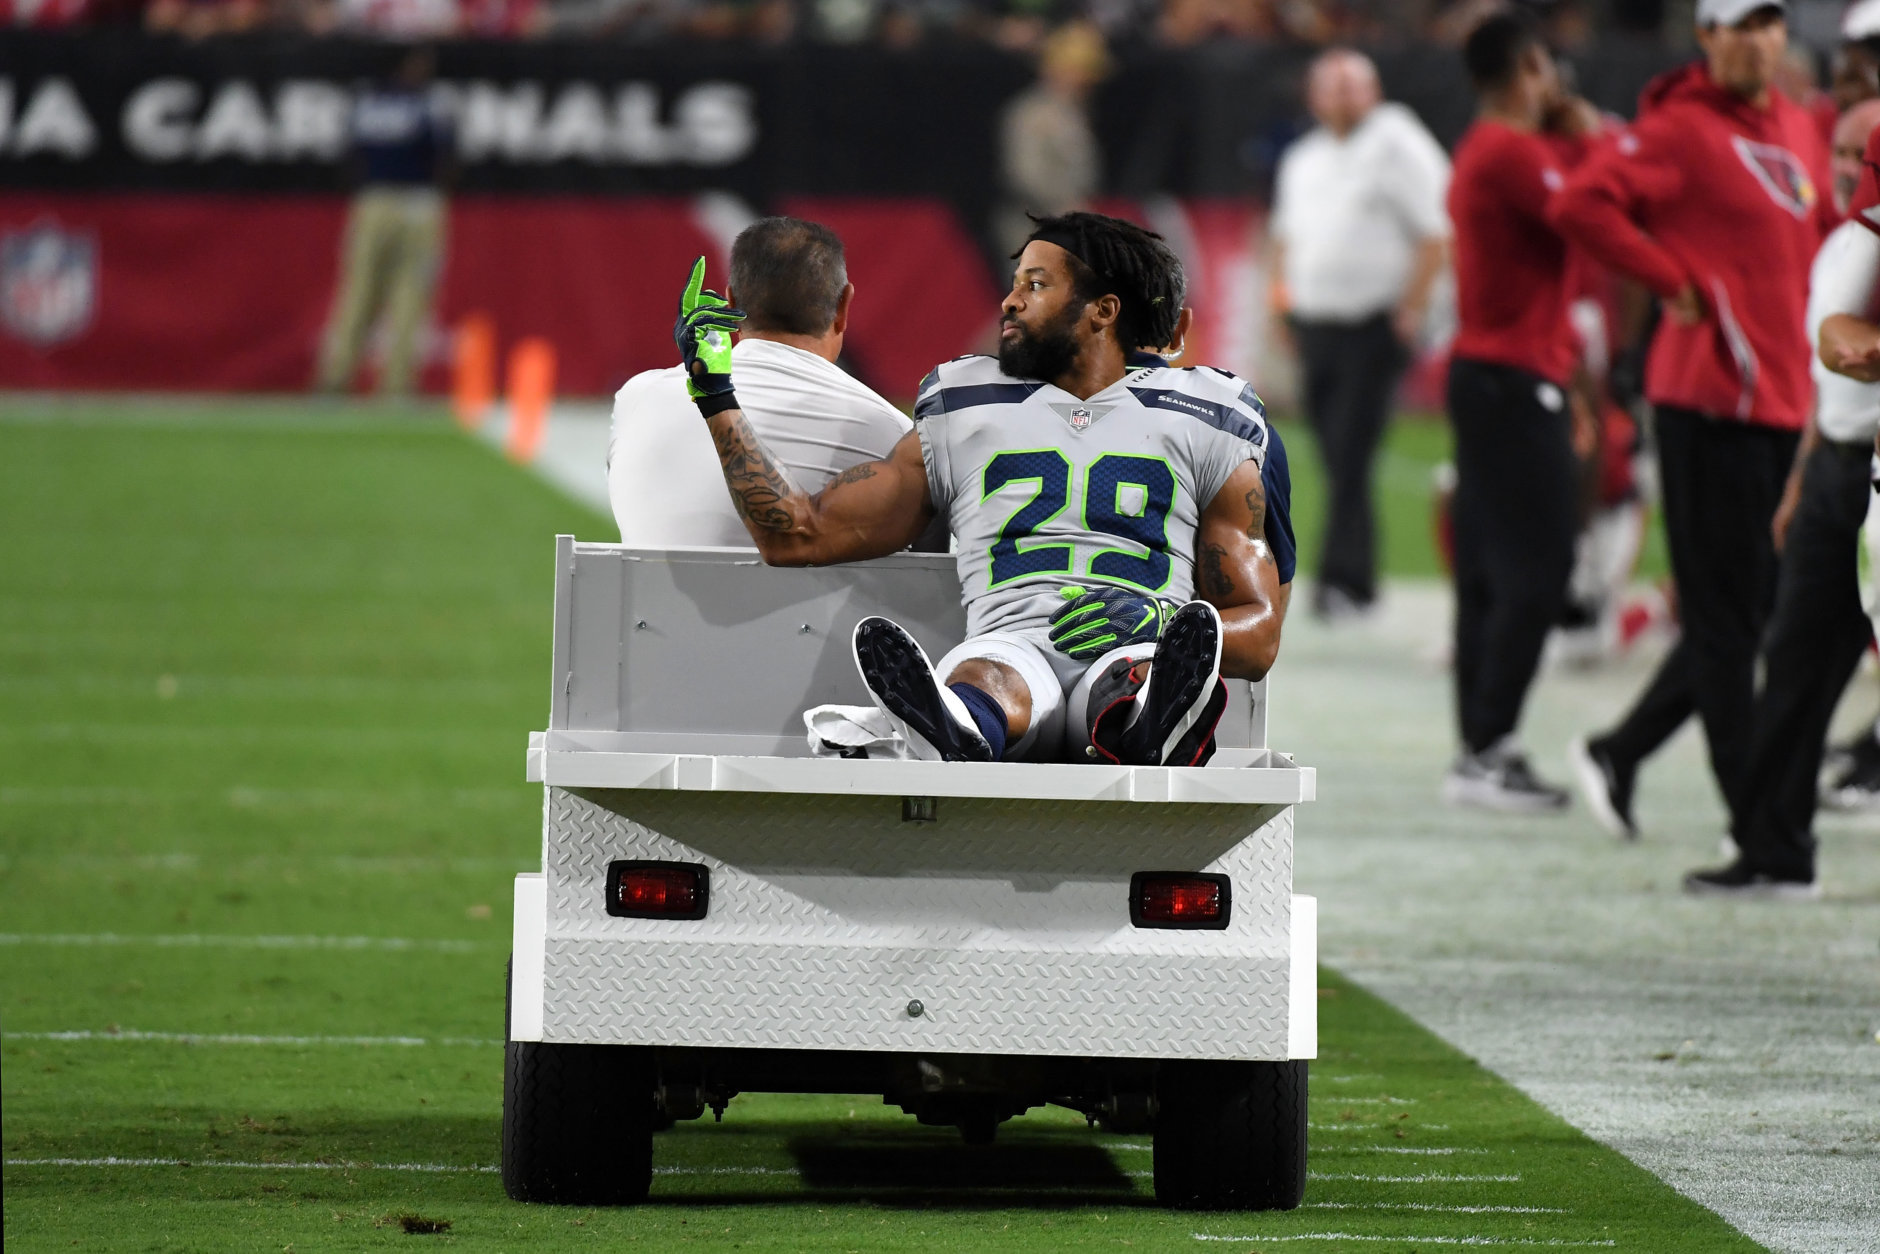 GLENDALE, AZ - SEPTEMBER 30:  Defensive back Earl Thomas #29 of the Seattle Seahawks gestures as he leaves the field on a cart after being injured during the fourth quarter against the Arizona Cardinals at State Farm Stadium on September 30, 2018 in Glendale, Arizona.  (Photo by Norm Hall/Getty Images)